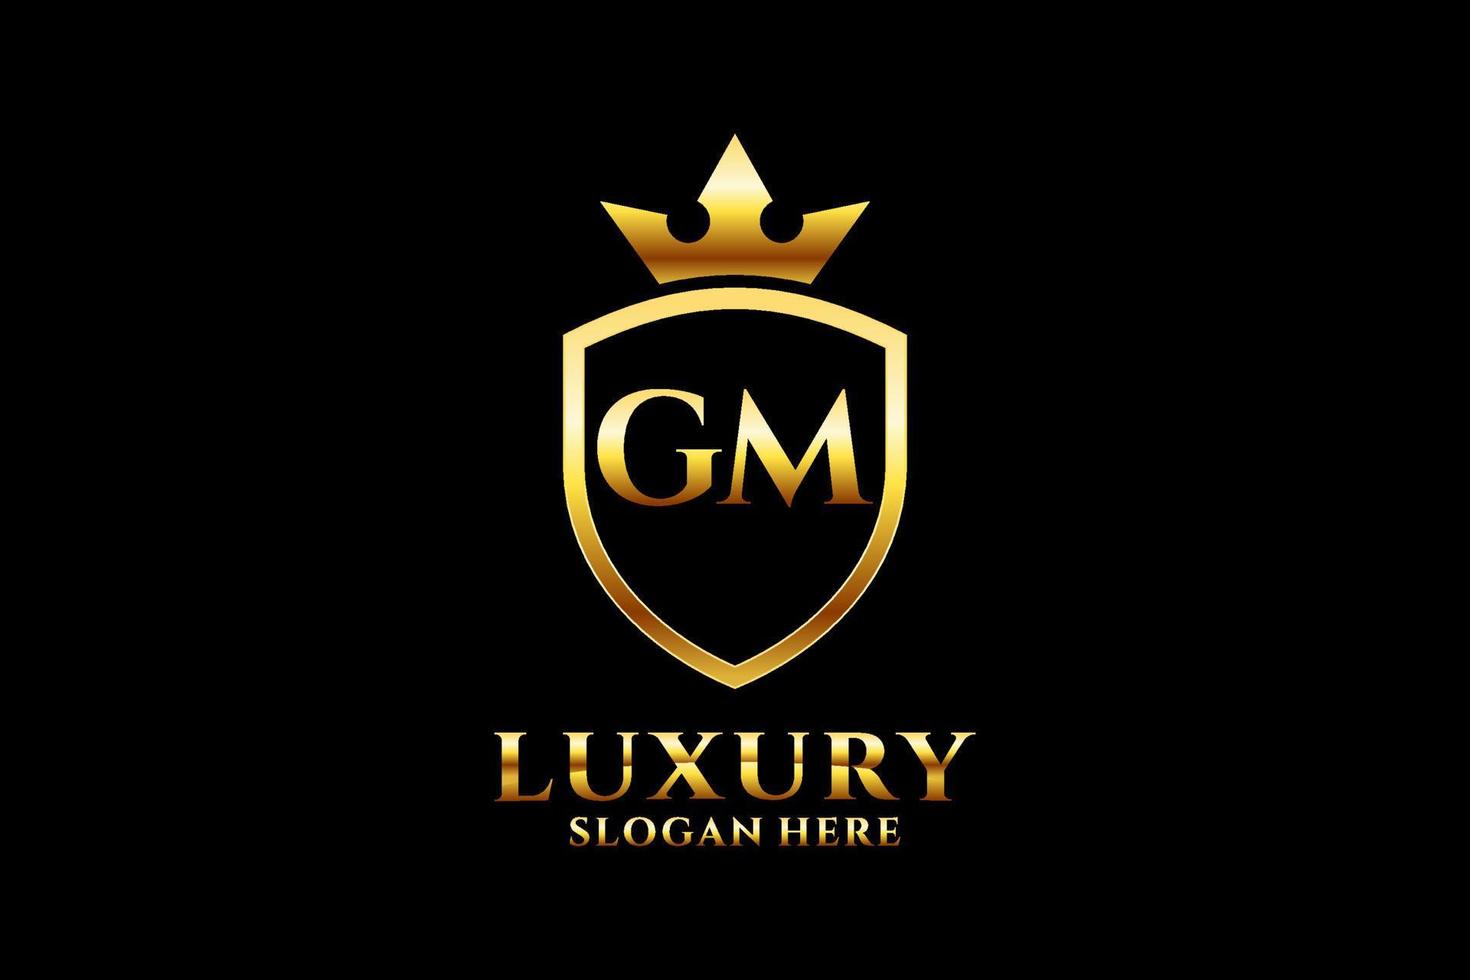 initial GM elegant luxury monogram logo or badge template with scrolls and royal crown - perfect for luxurious branding projects vector